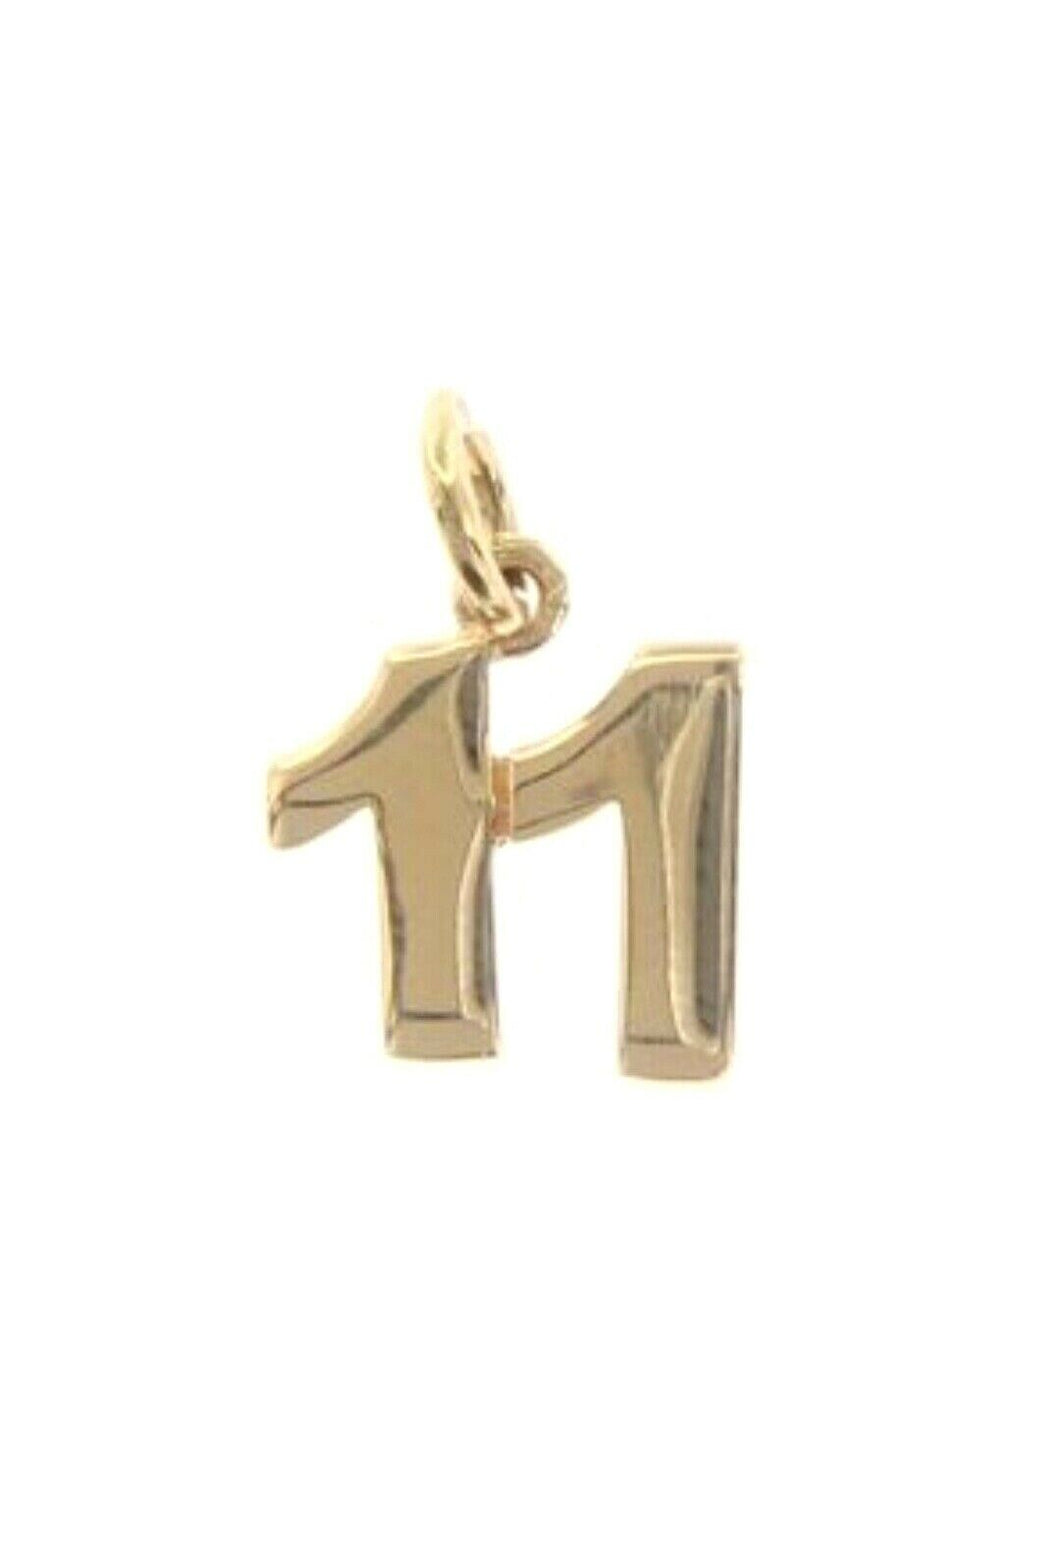 18k yellow gold number 11 eleven small pendant charm, 0.4